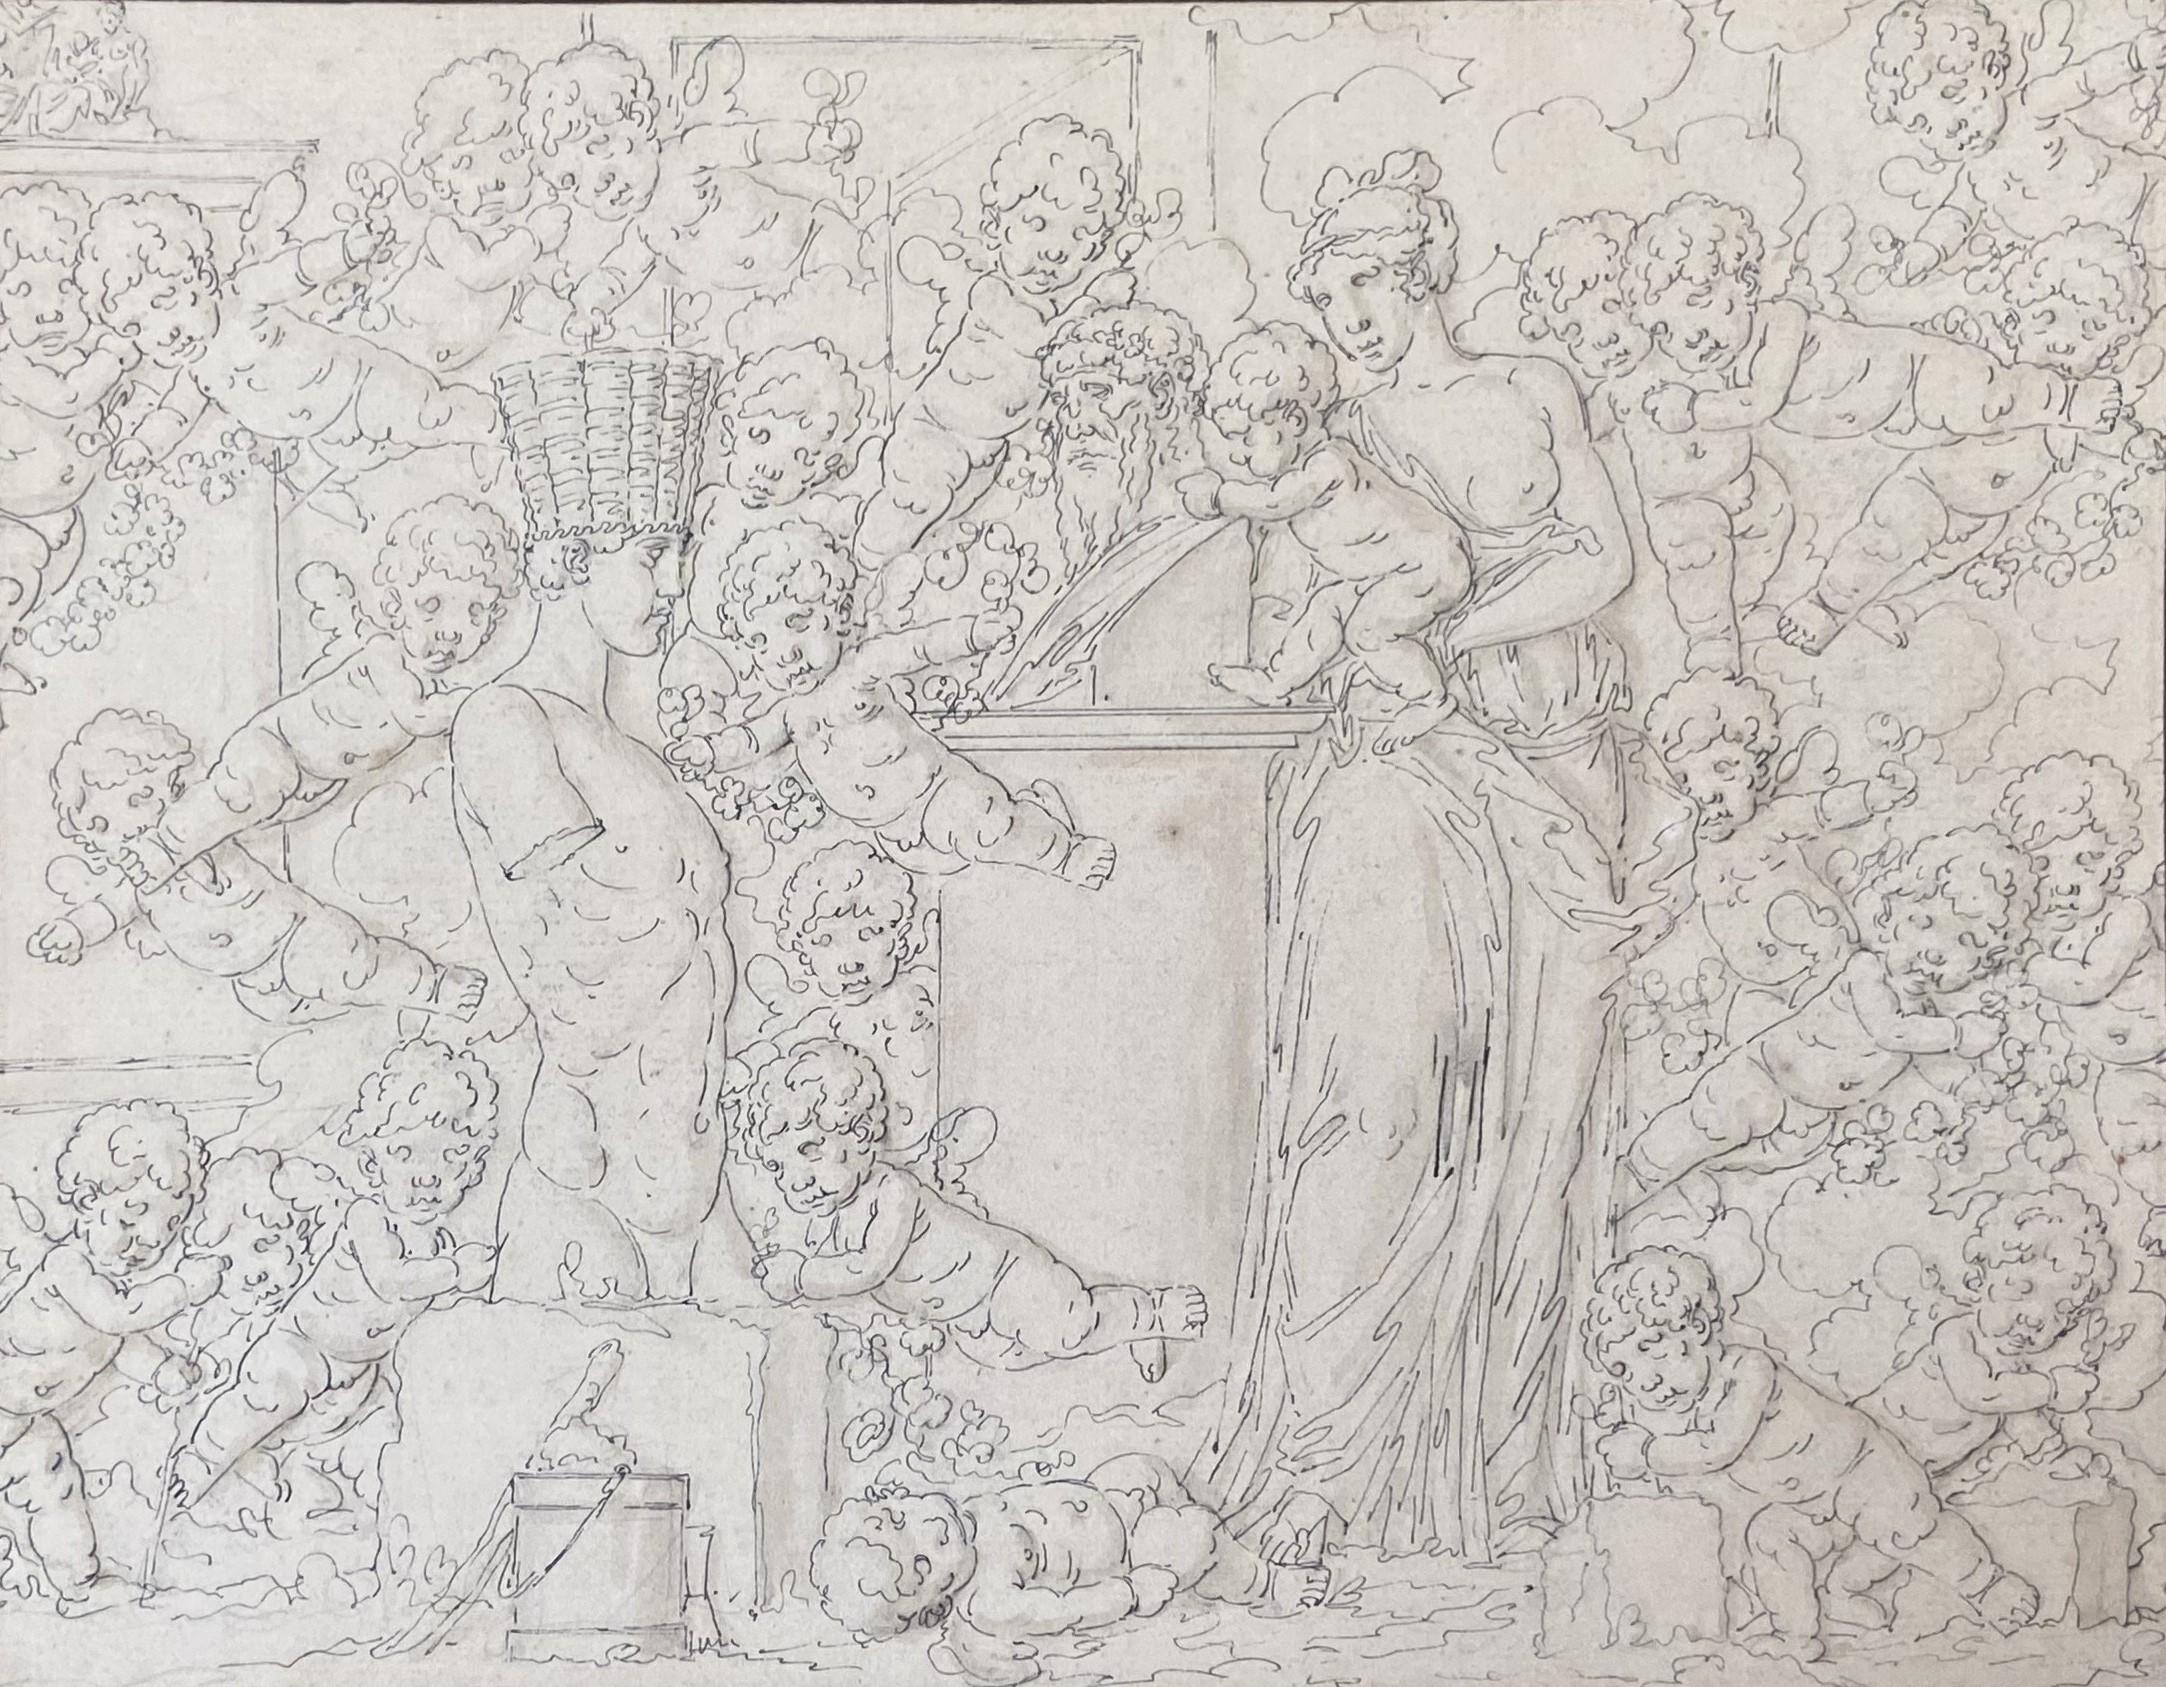 Louis-Félix de La Rue (1730-1777) 
A Mythological scene
Pen and black ink on paper 
Bears an old inscription with the name of the artist on the lower left border of the mount
20.7 x 26.3 cm
In good  condition, a small foxing in the middle of the